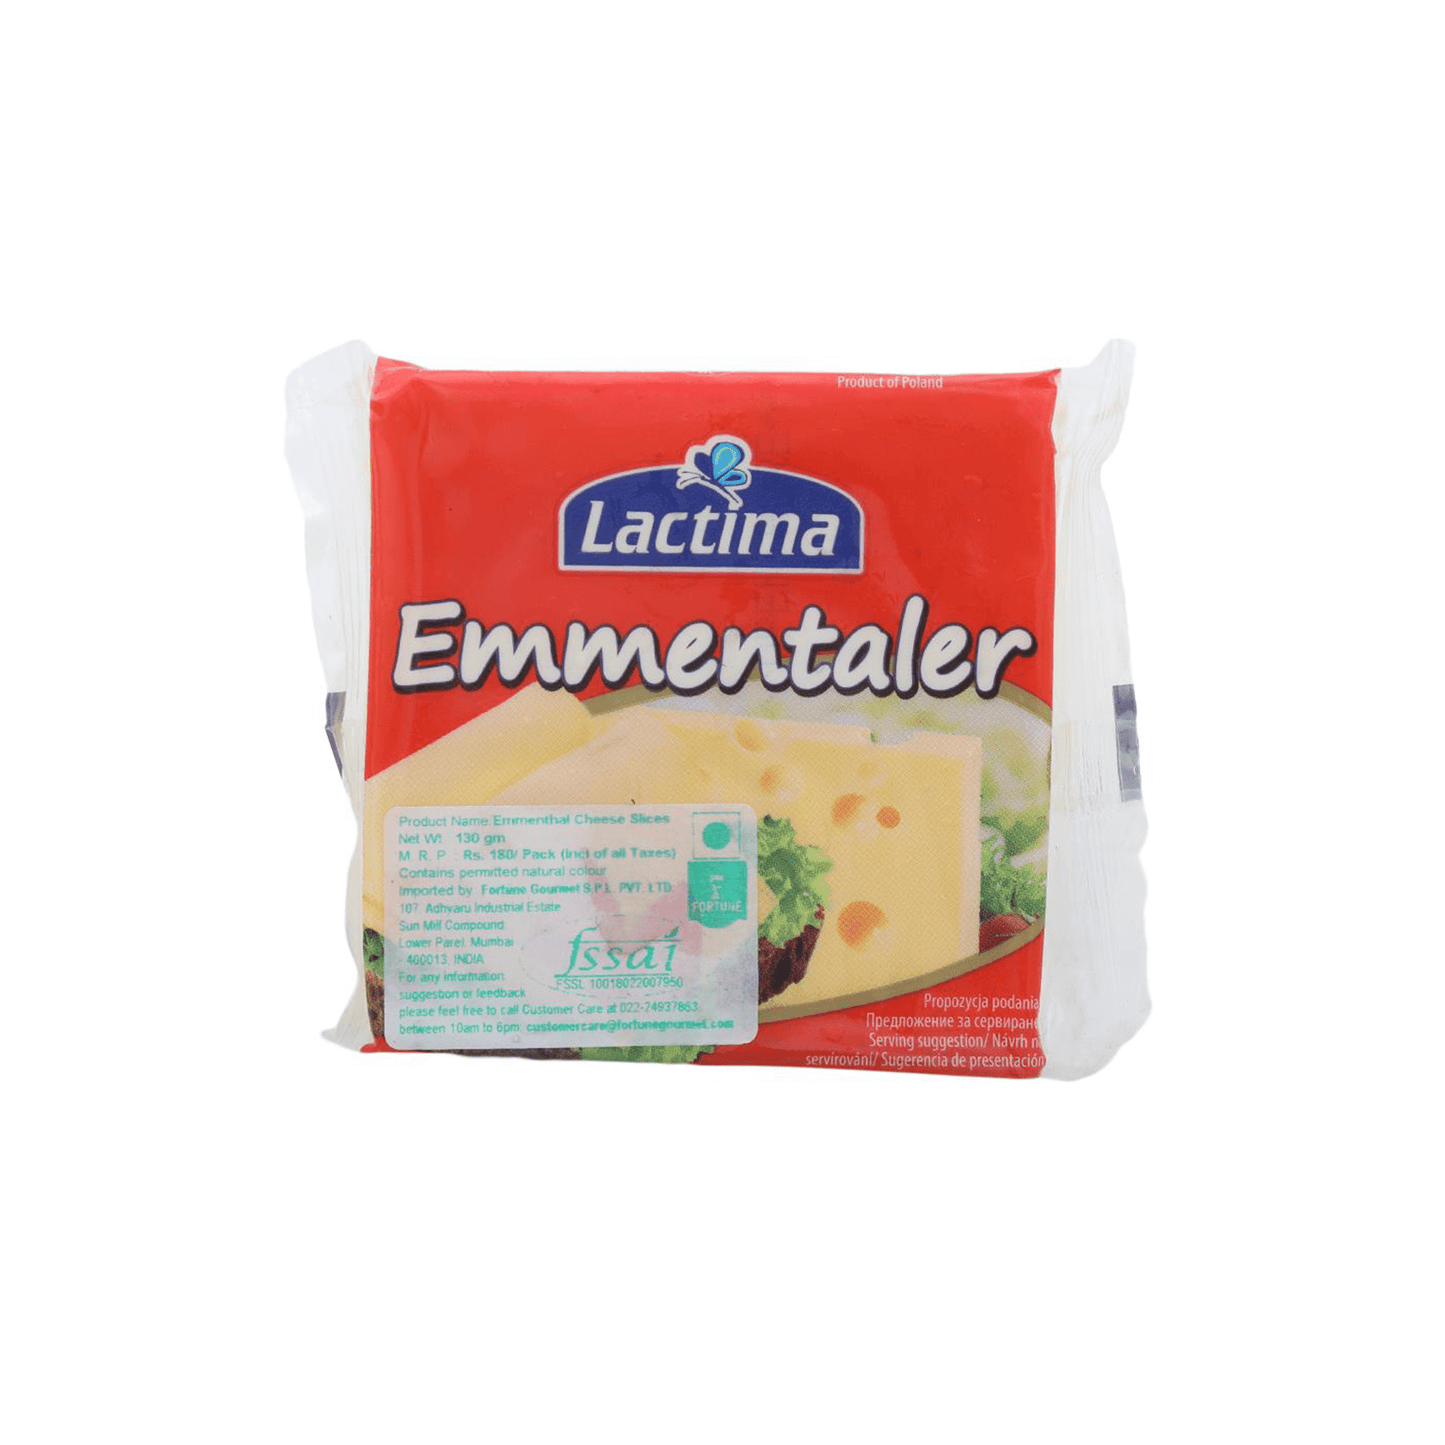 Lactima Emmenthal Cheese Slices.